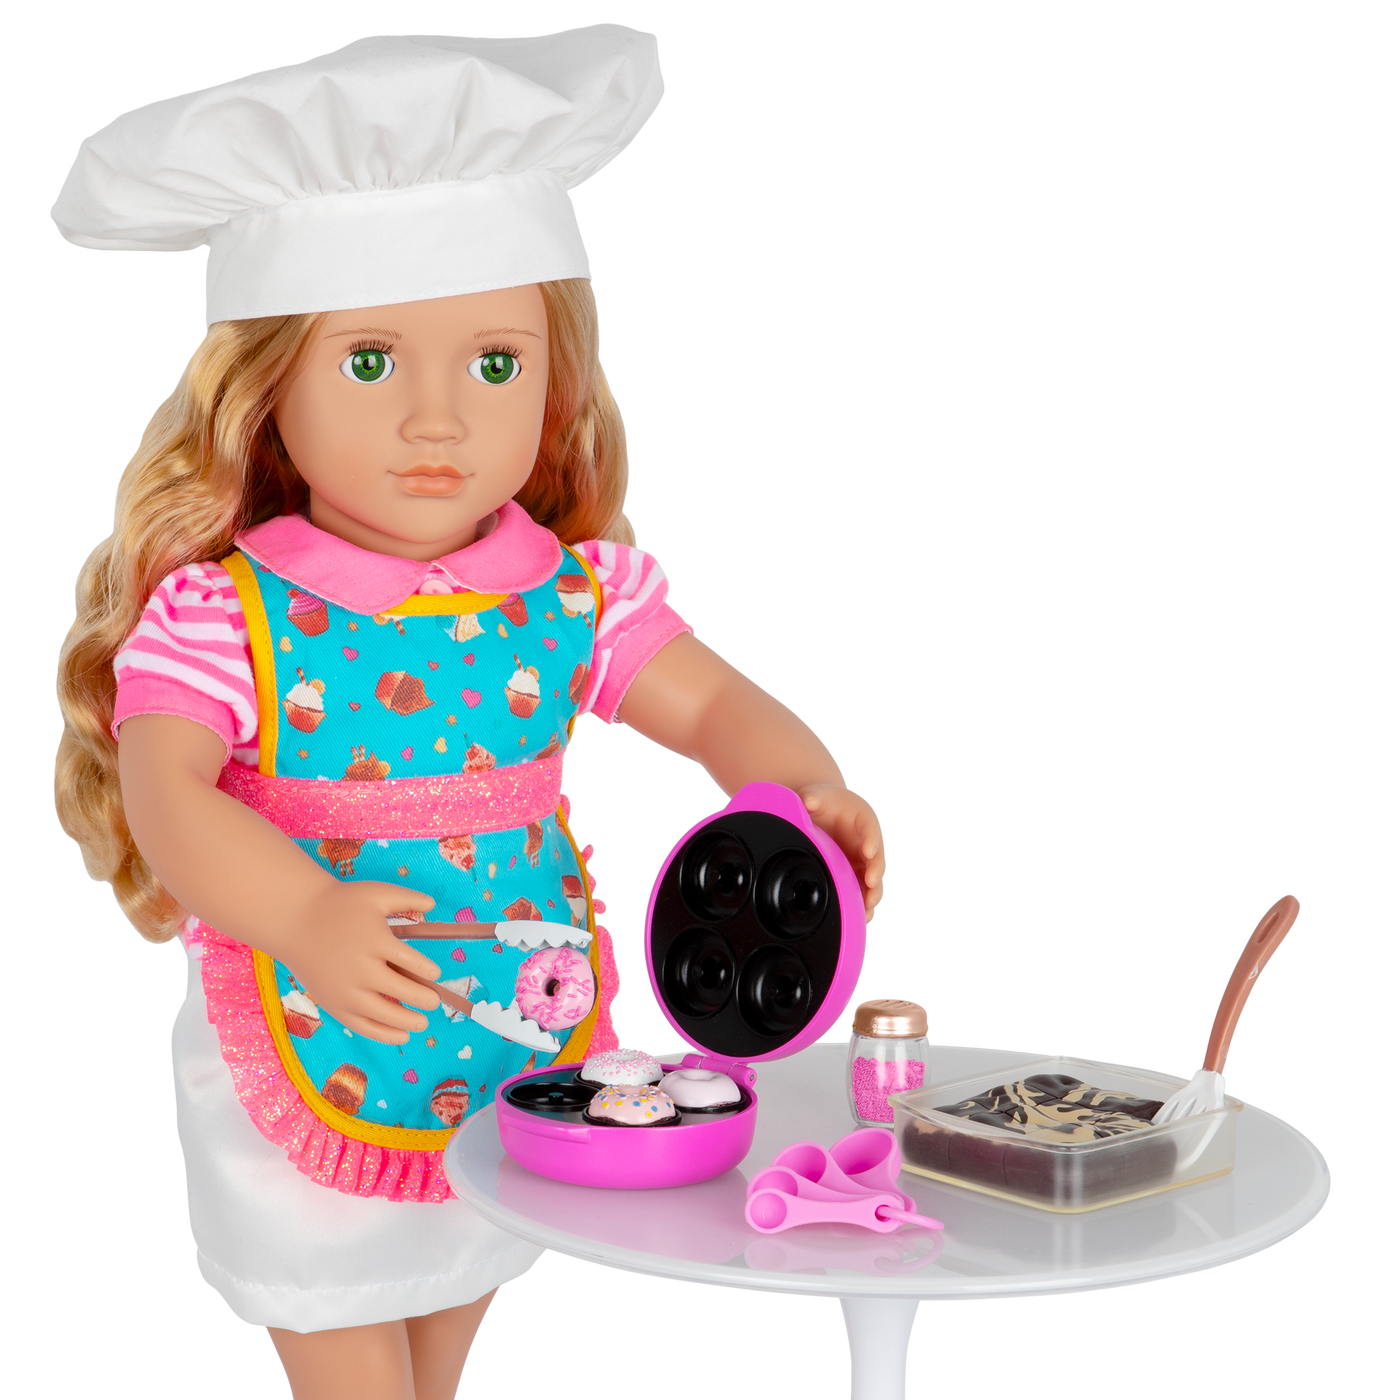 Baker's Kitchen, 18-inch Doll Cooking Set